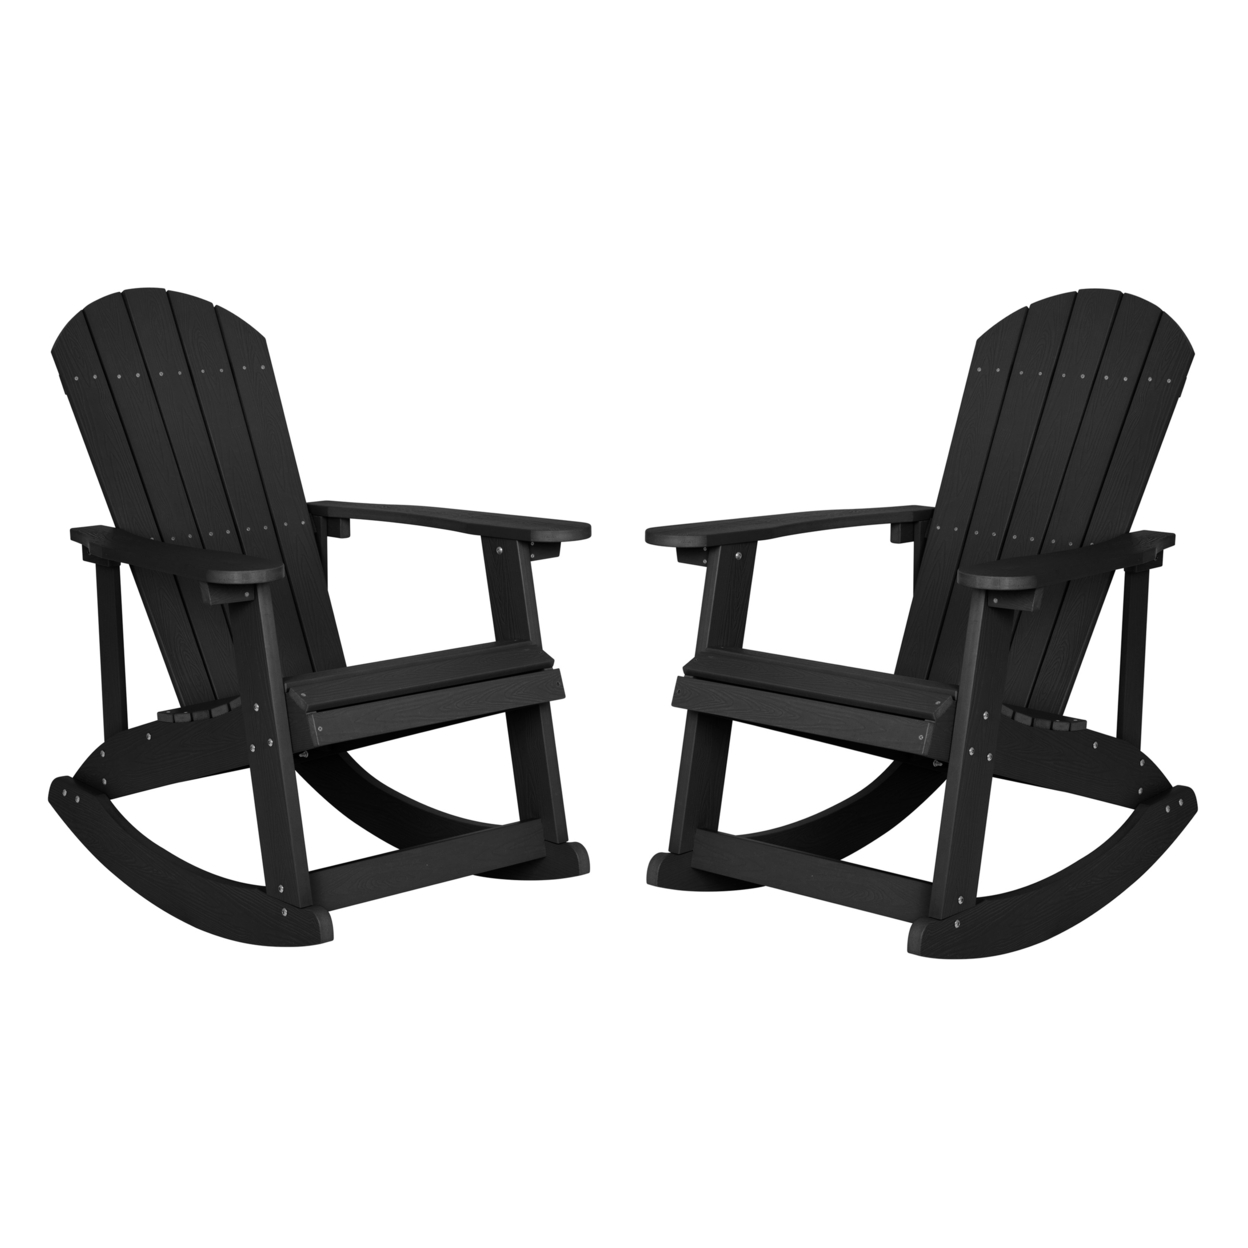 Savannah All-Weather Poly Resin Wood Adirondack Rocking Chair With Rust Resistant Stainless Steel Hardware In Black - Set Of 2